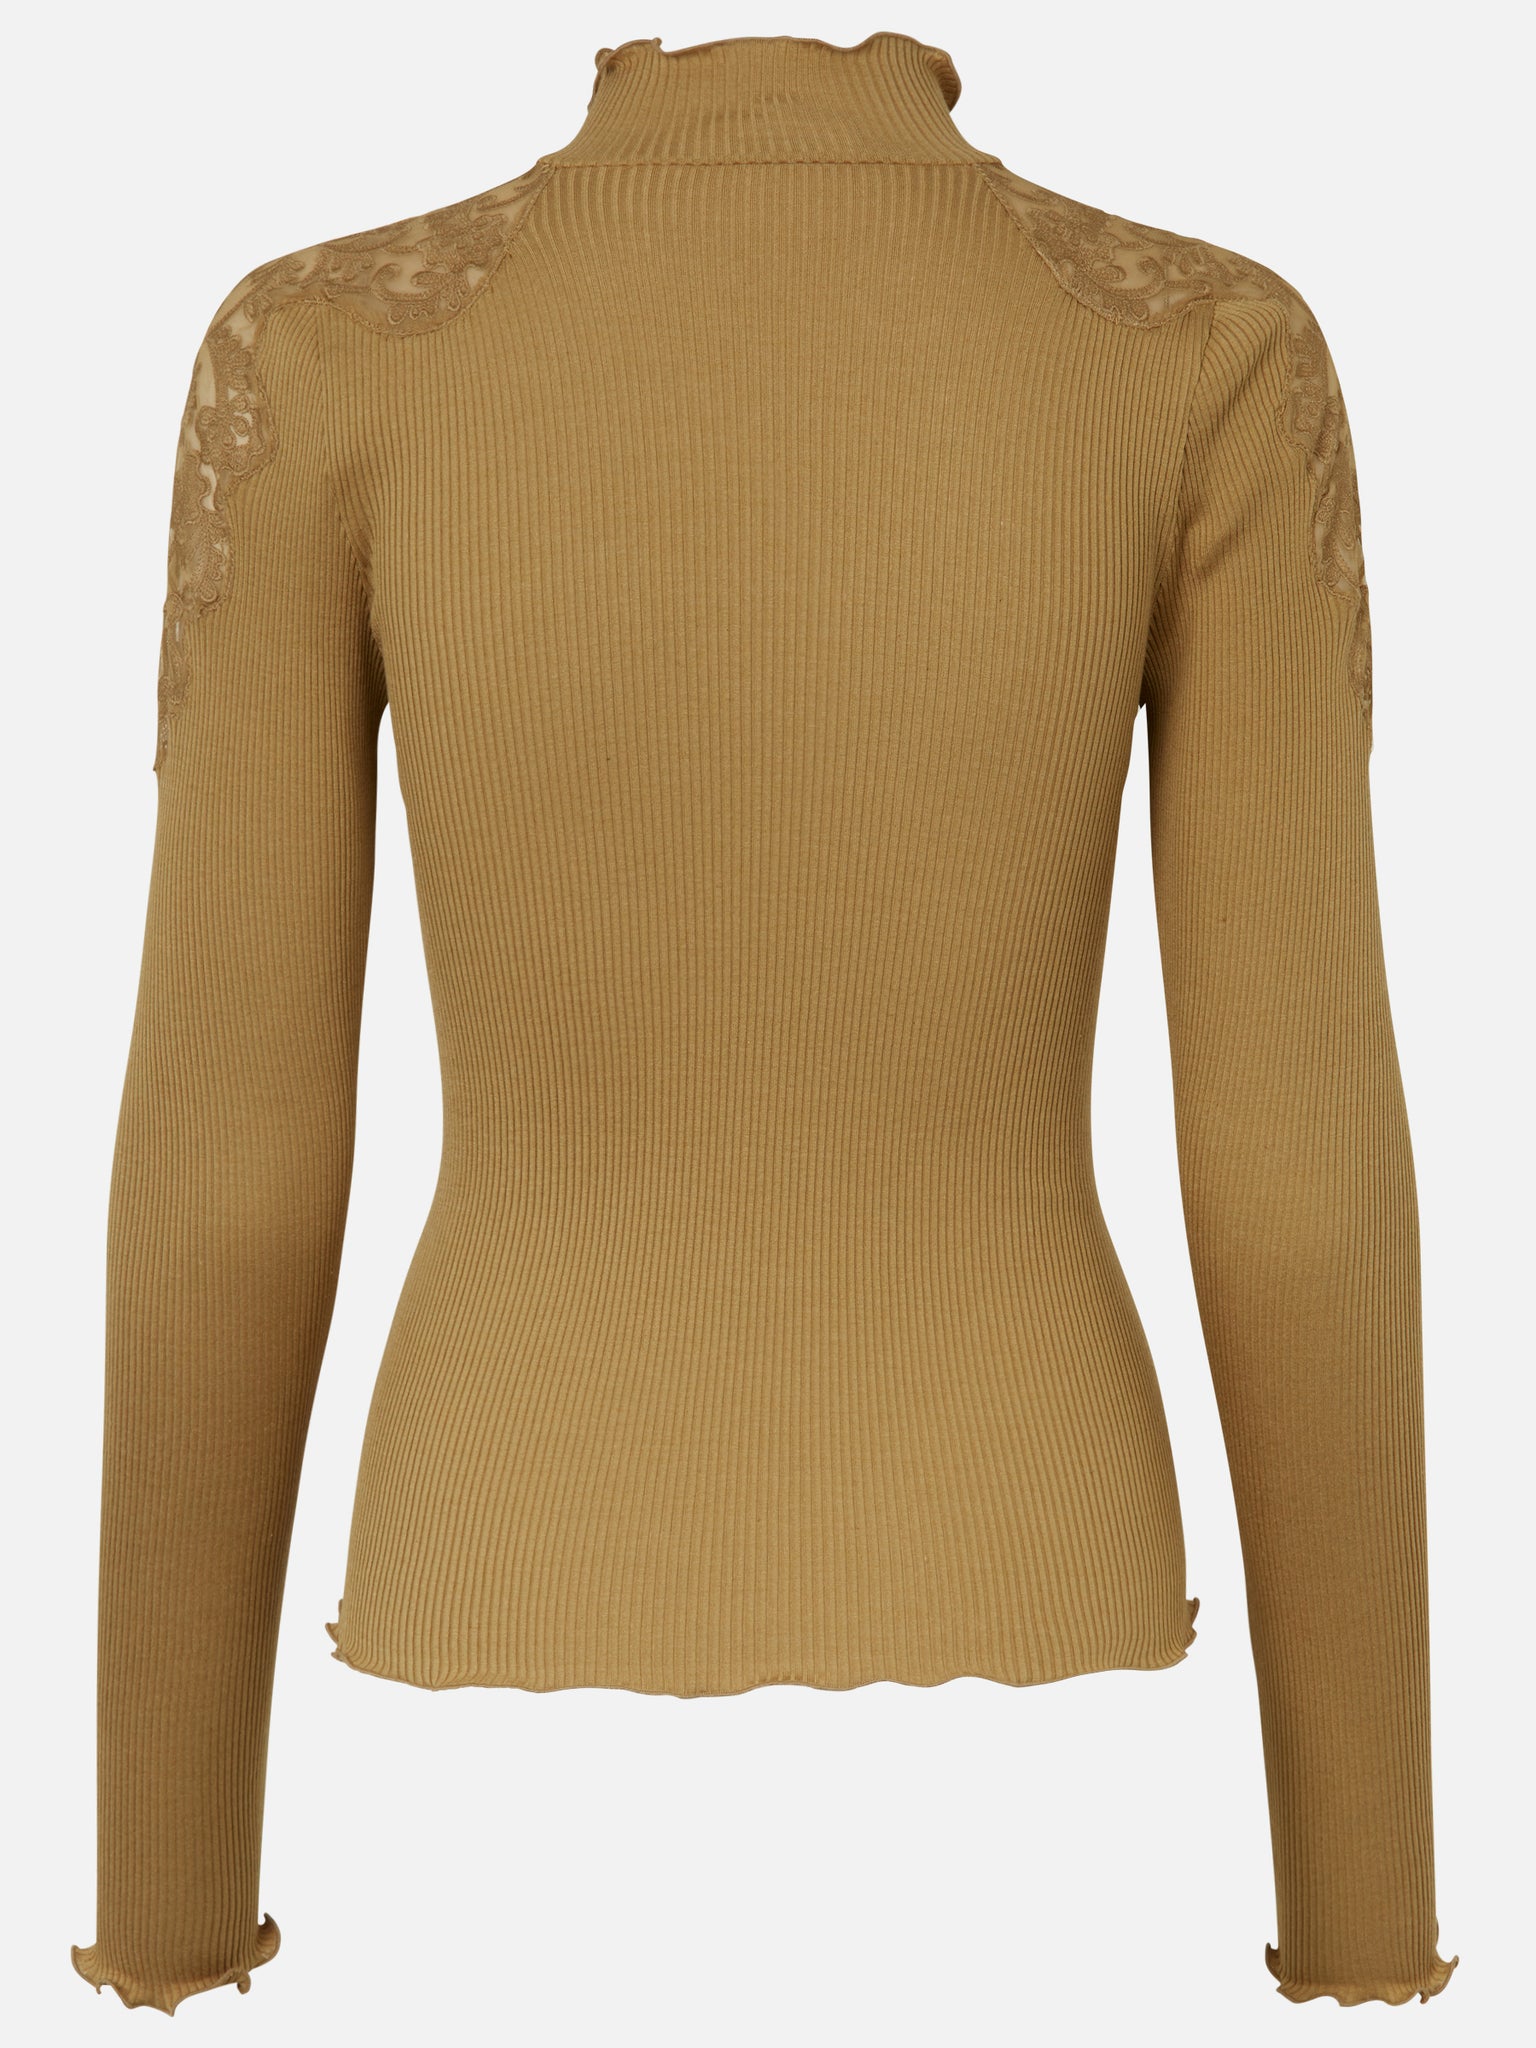 Turtleneck blouse with lace